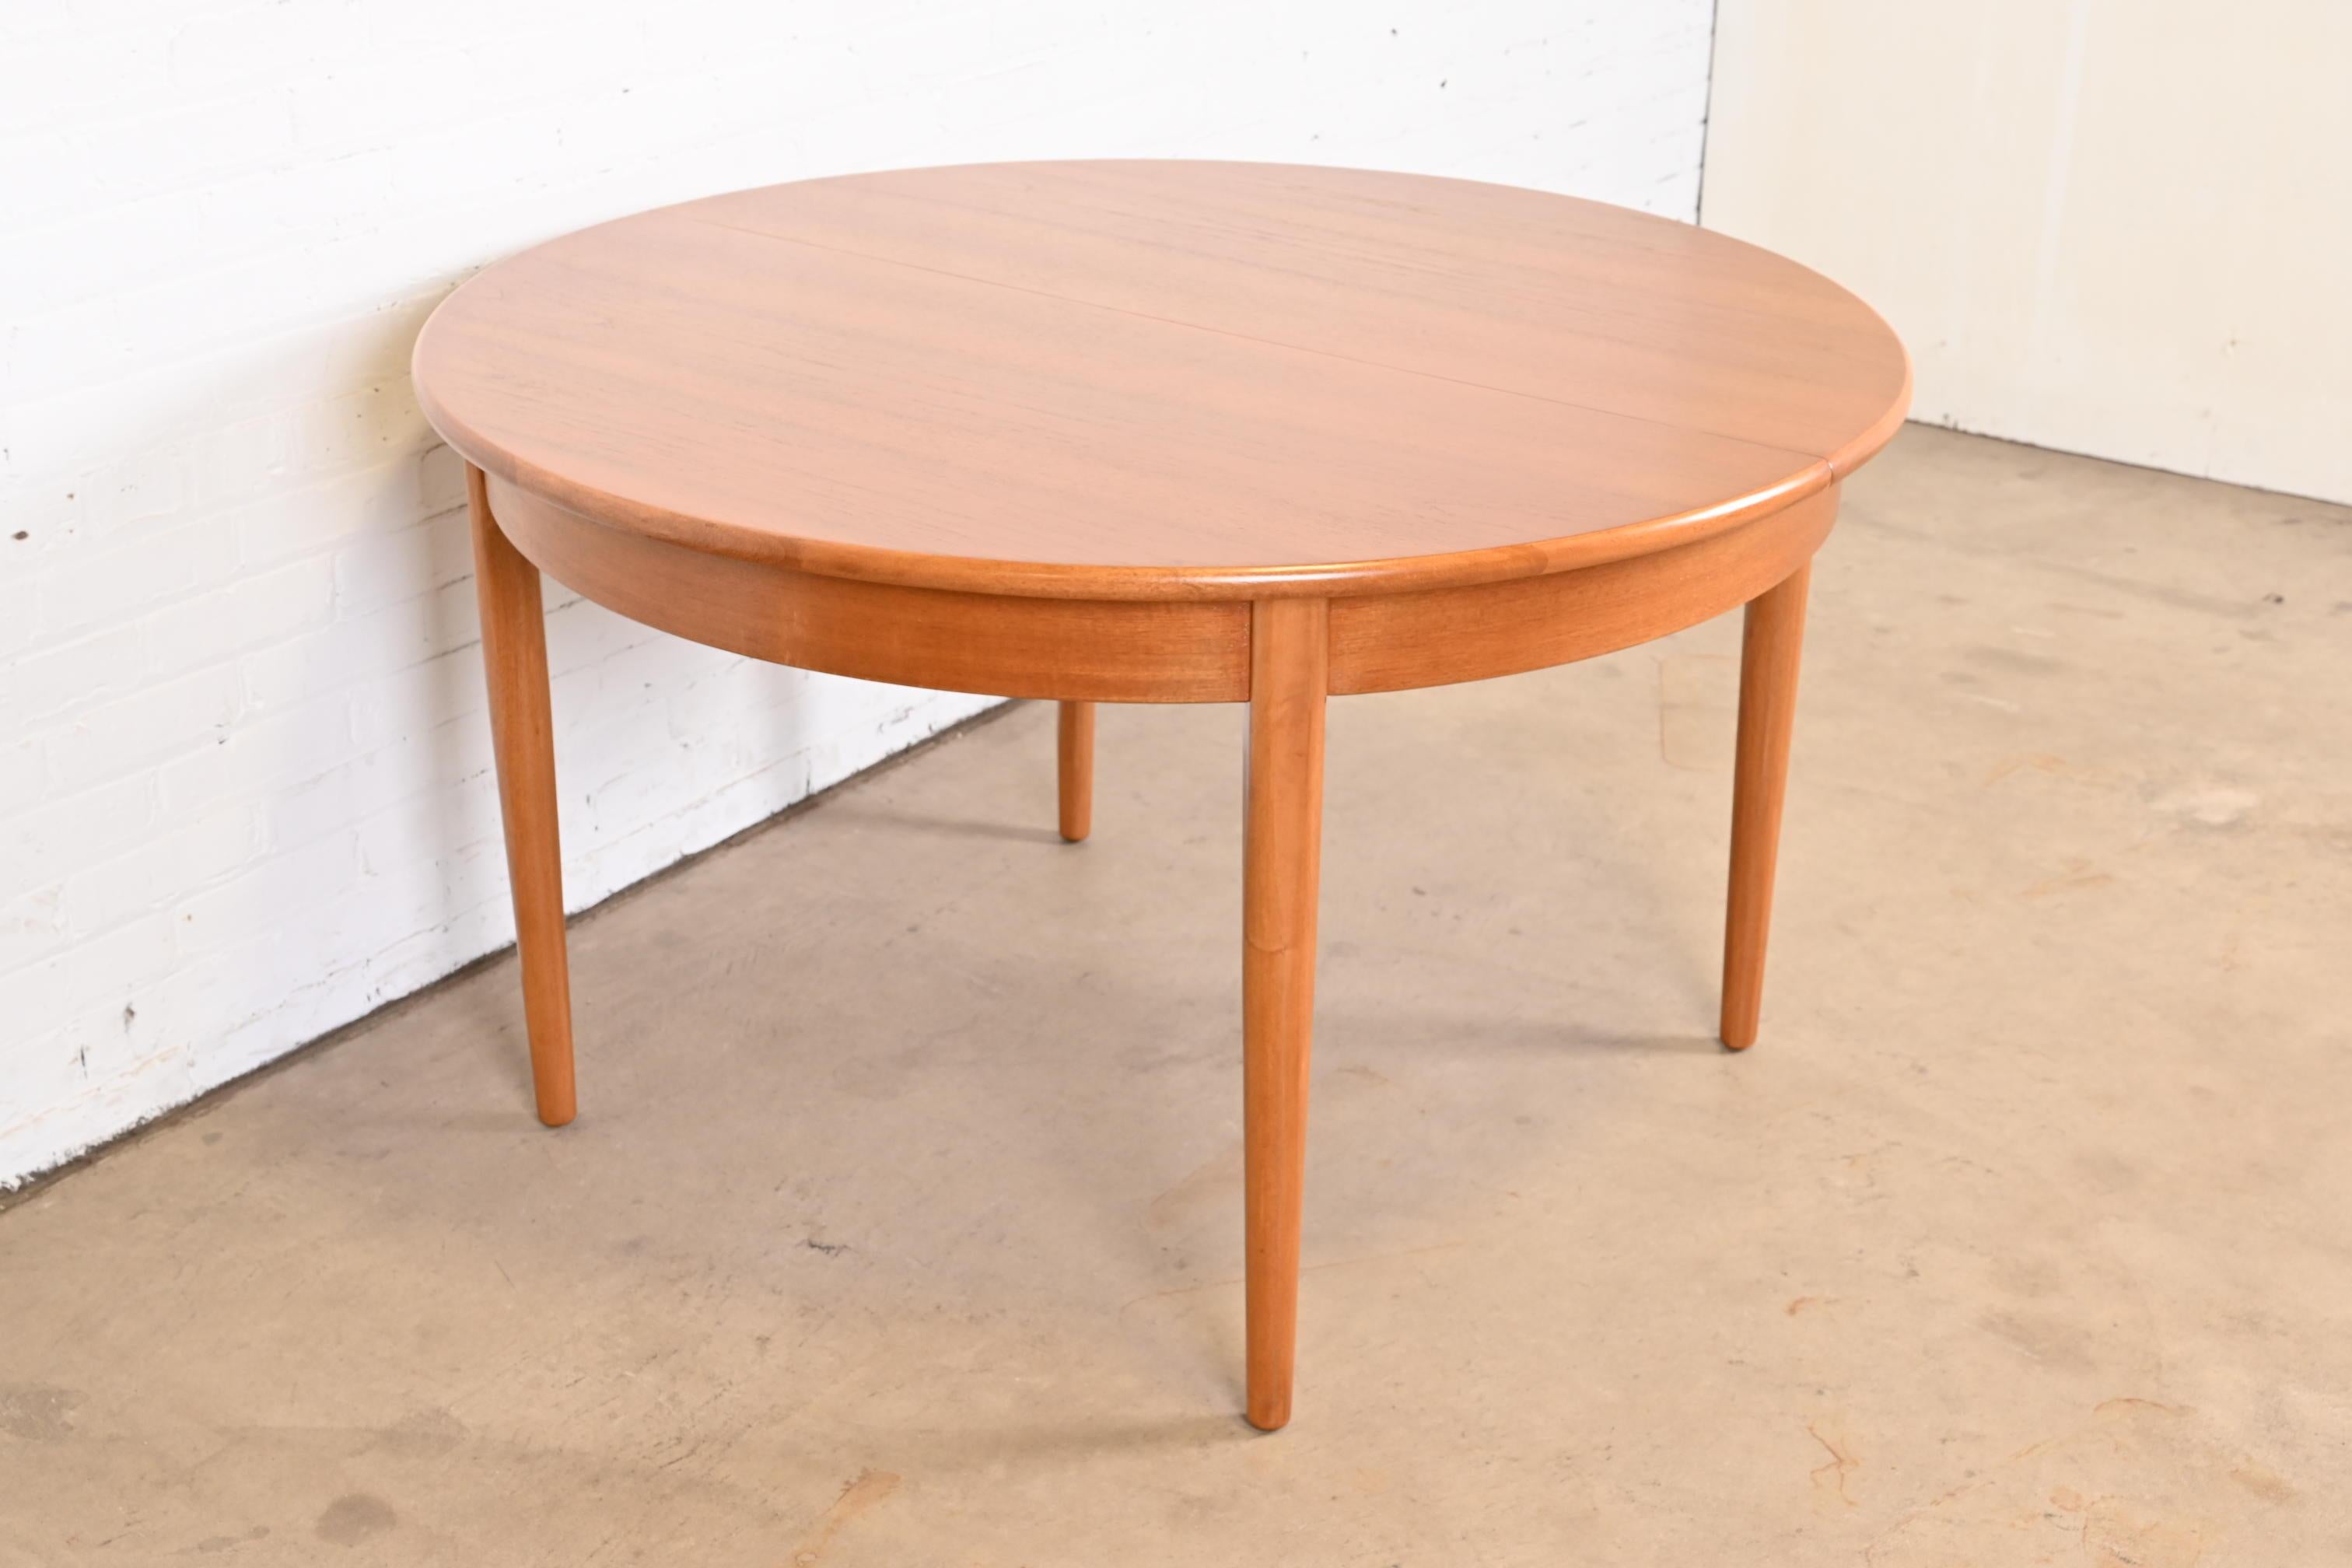 Mid-20th Century Danish Modern Teak Round Dining Table, Newly Refinished For Sale